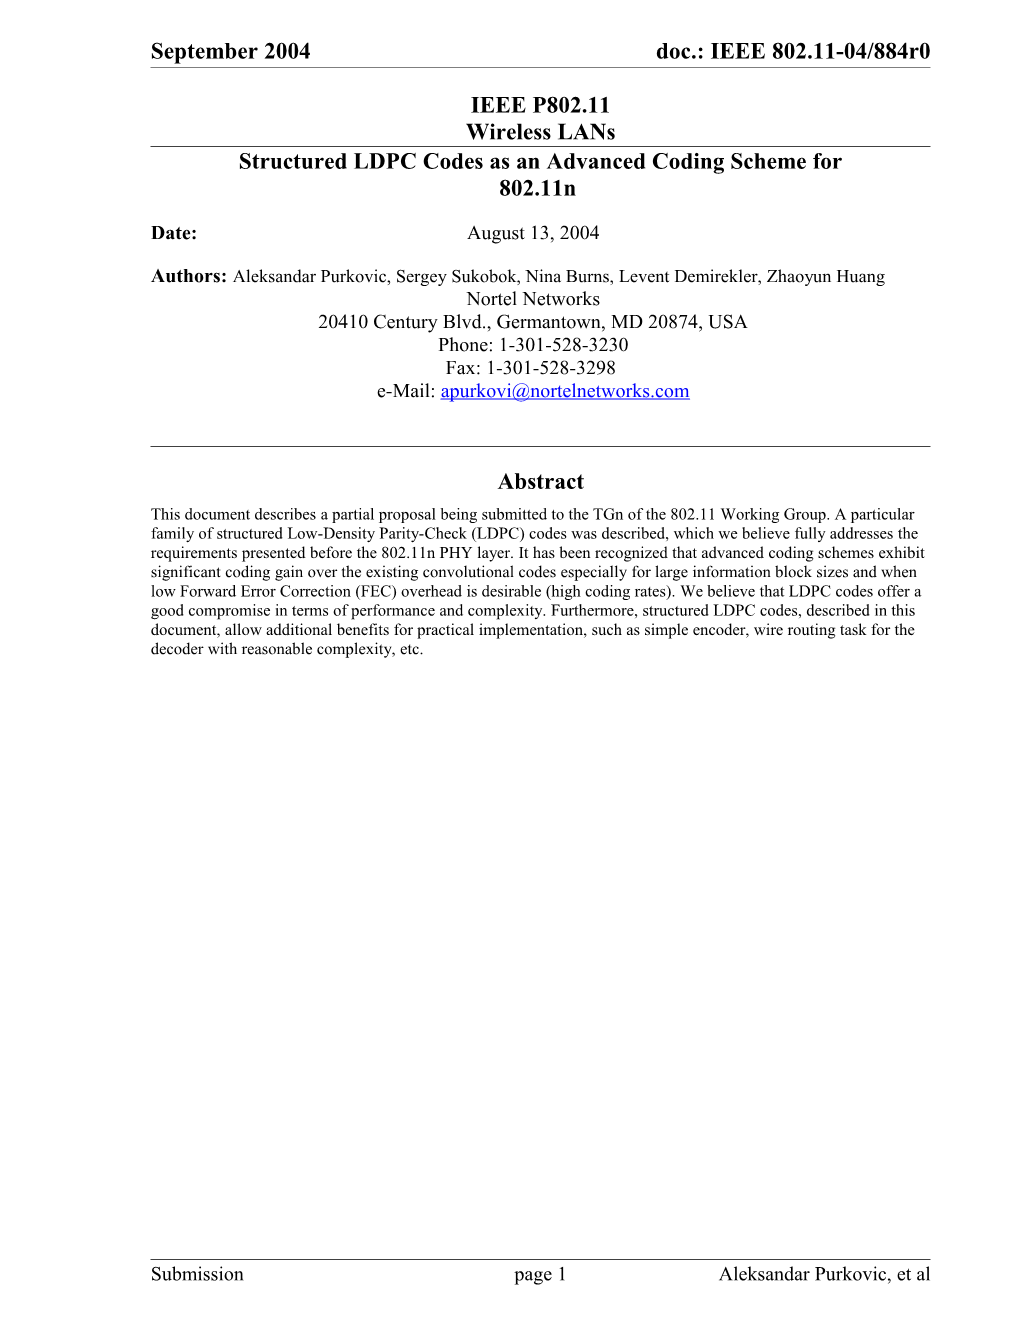 Structured LDPC Codes As an Advanced Coding Scheme for 802.11N